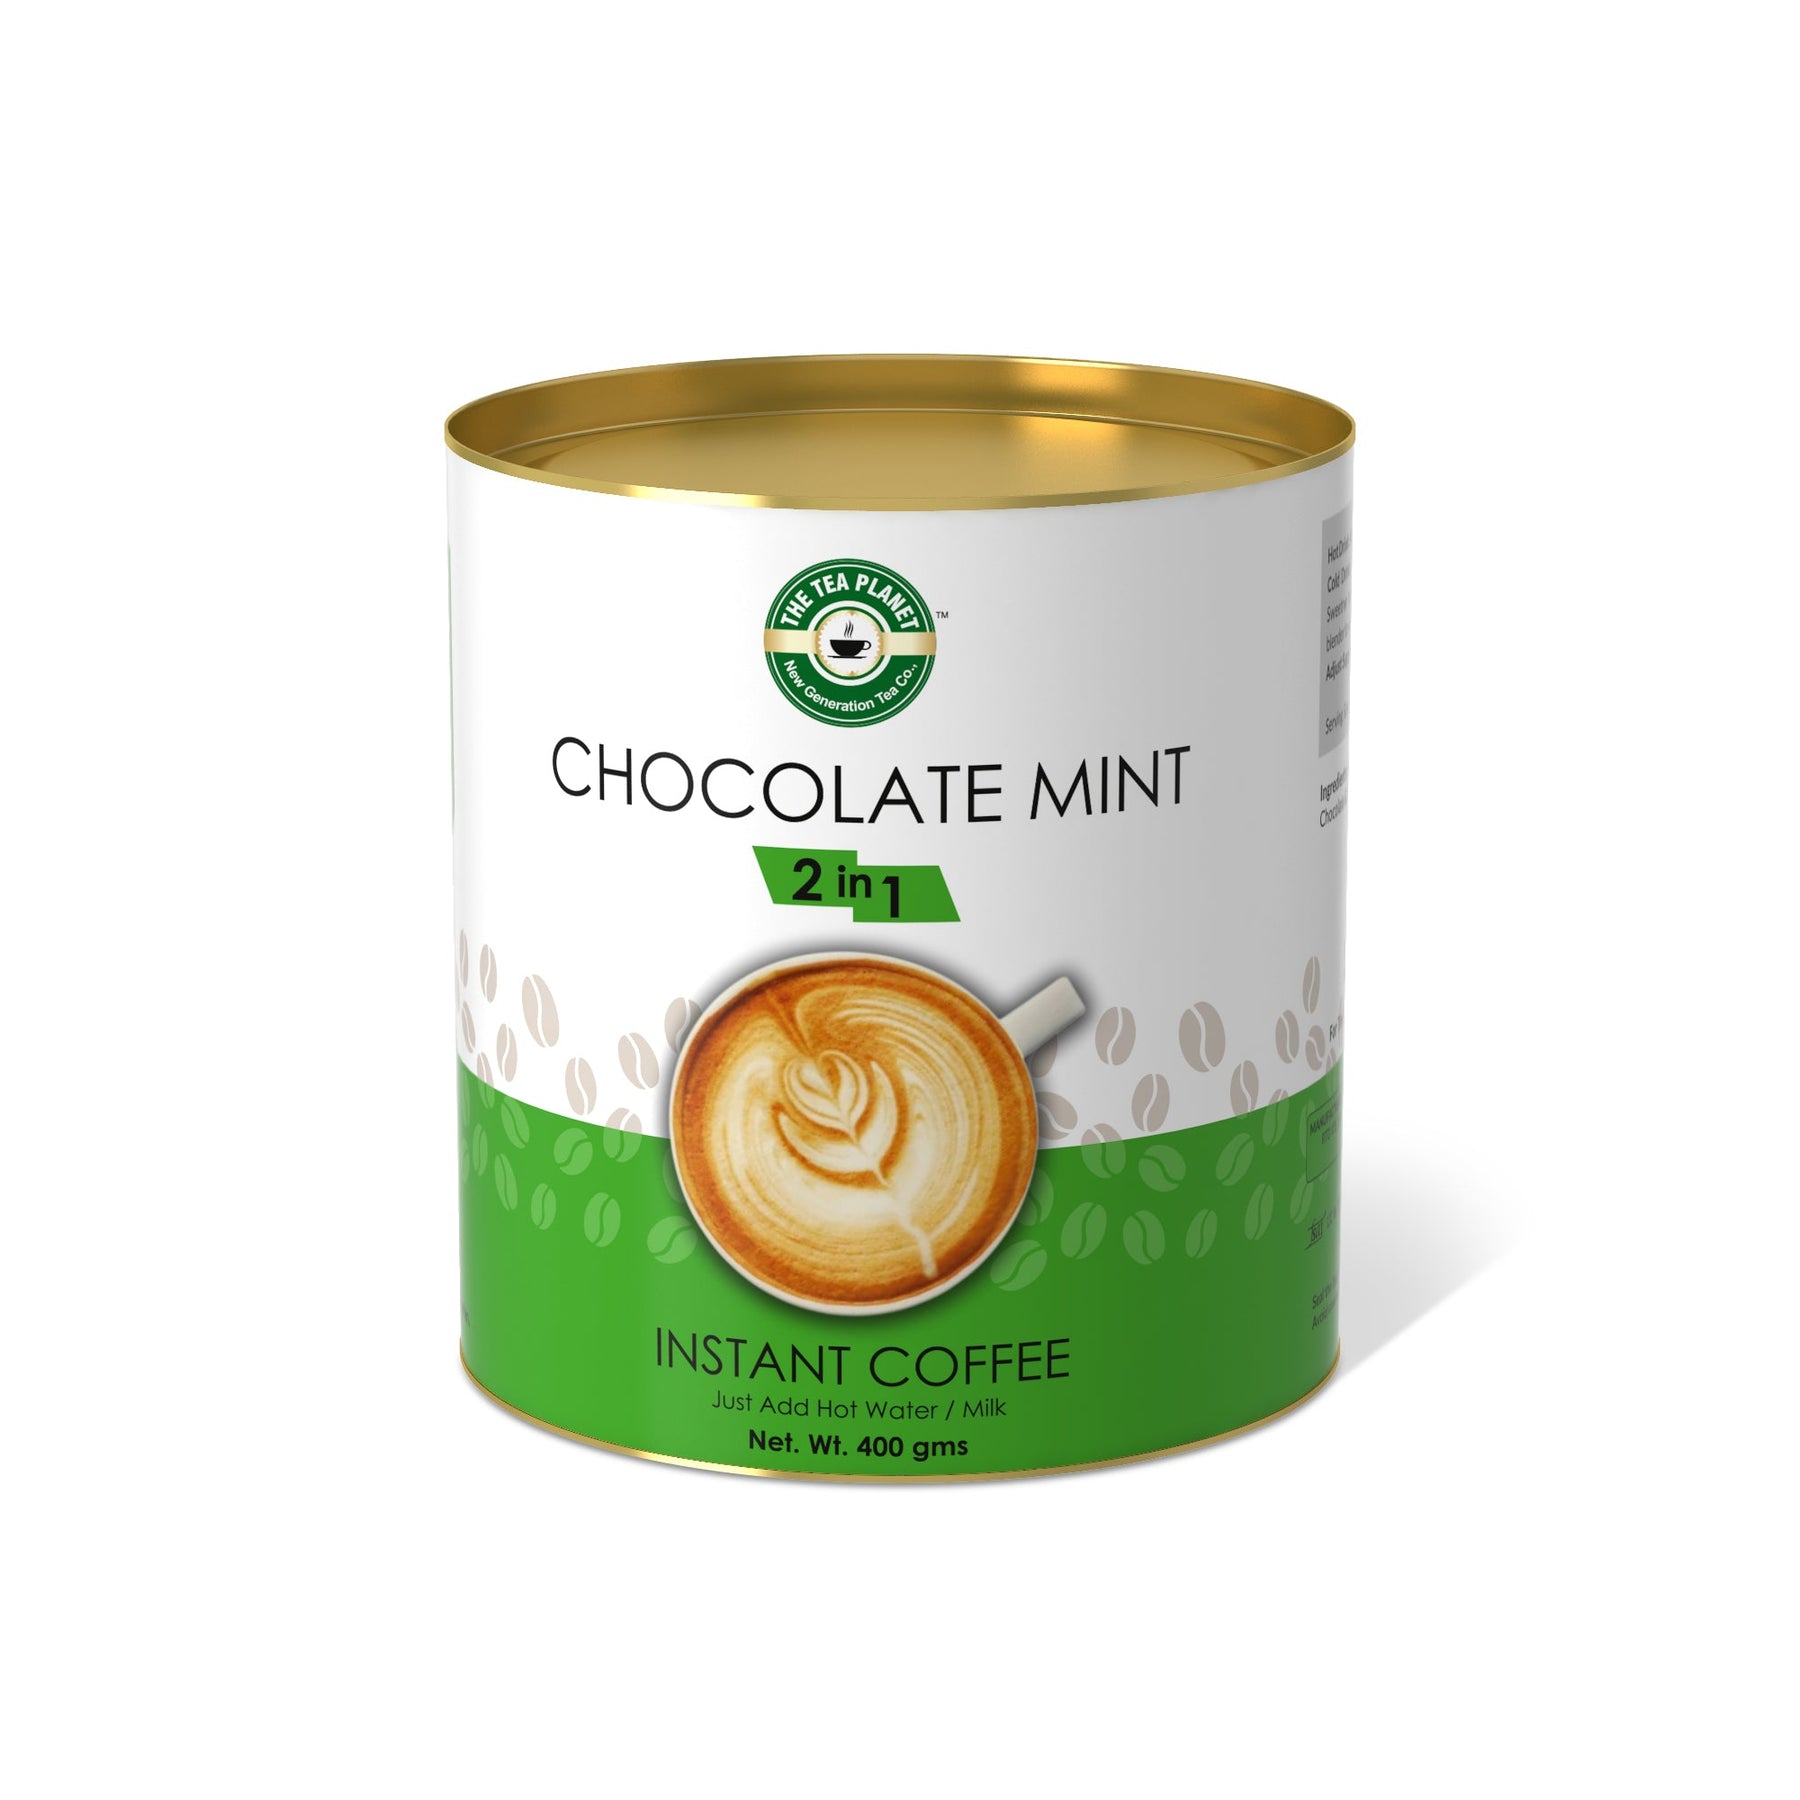 Chocolate Mint Instant Coffee Premix (2 in 1) - 250 gms